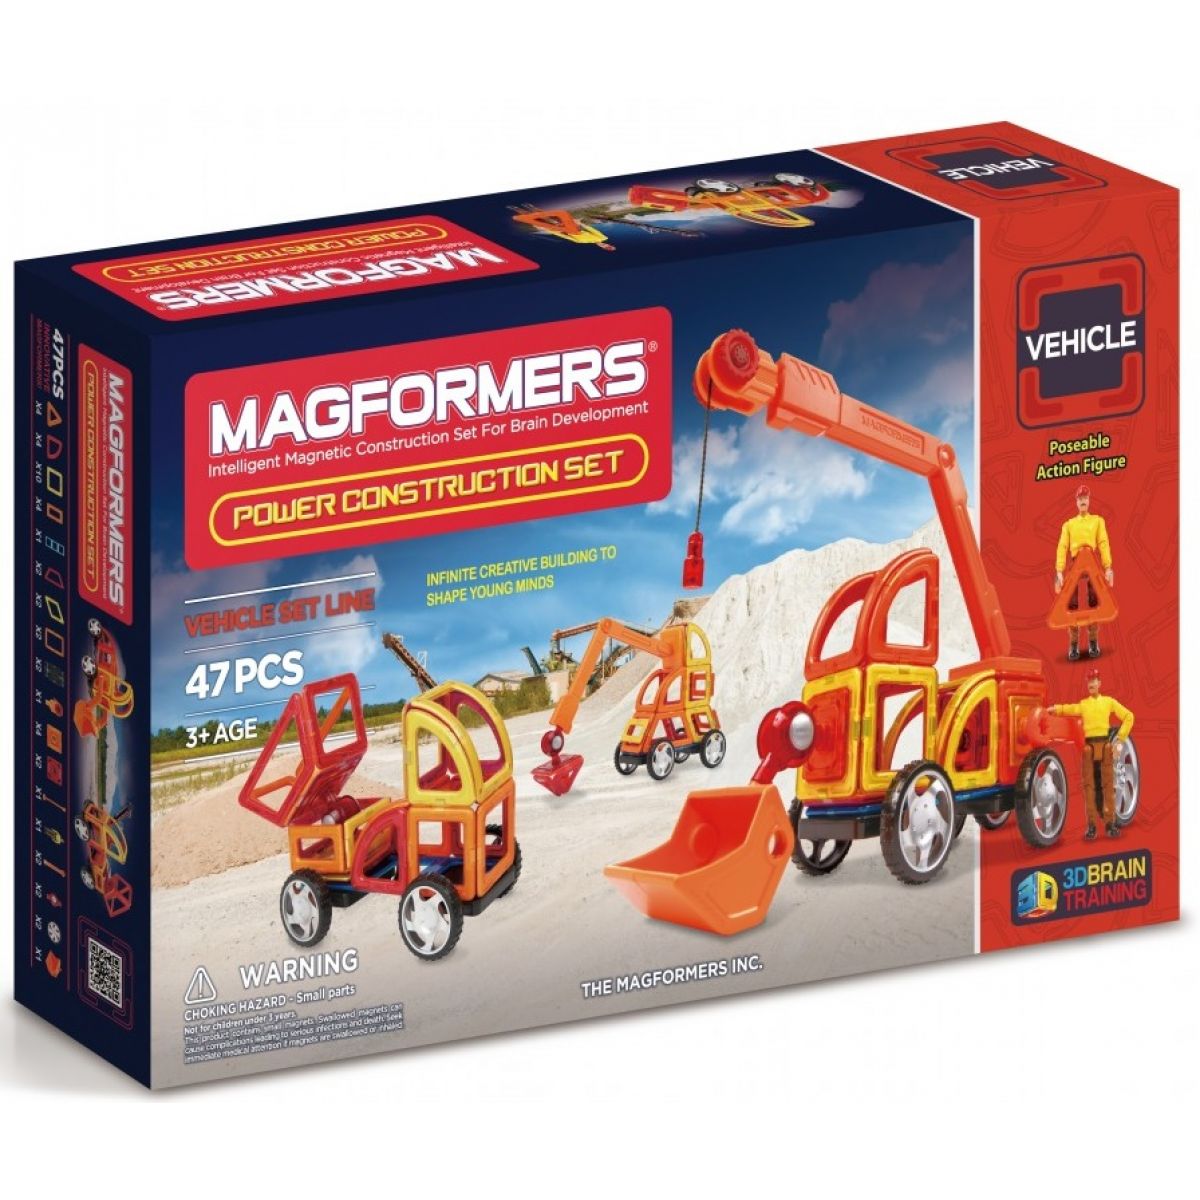 Magformers Power Construction